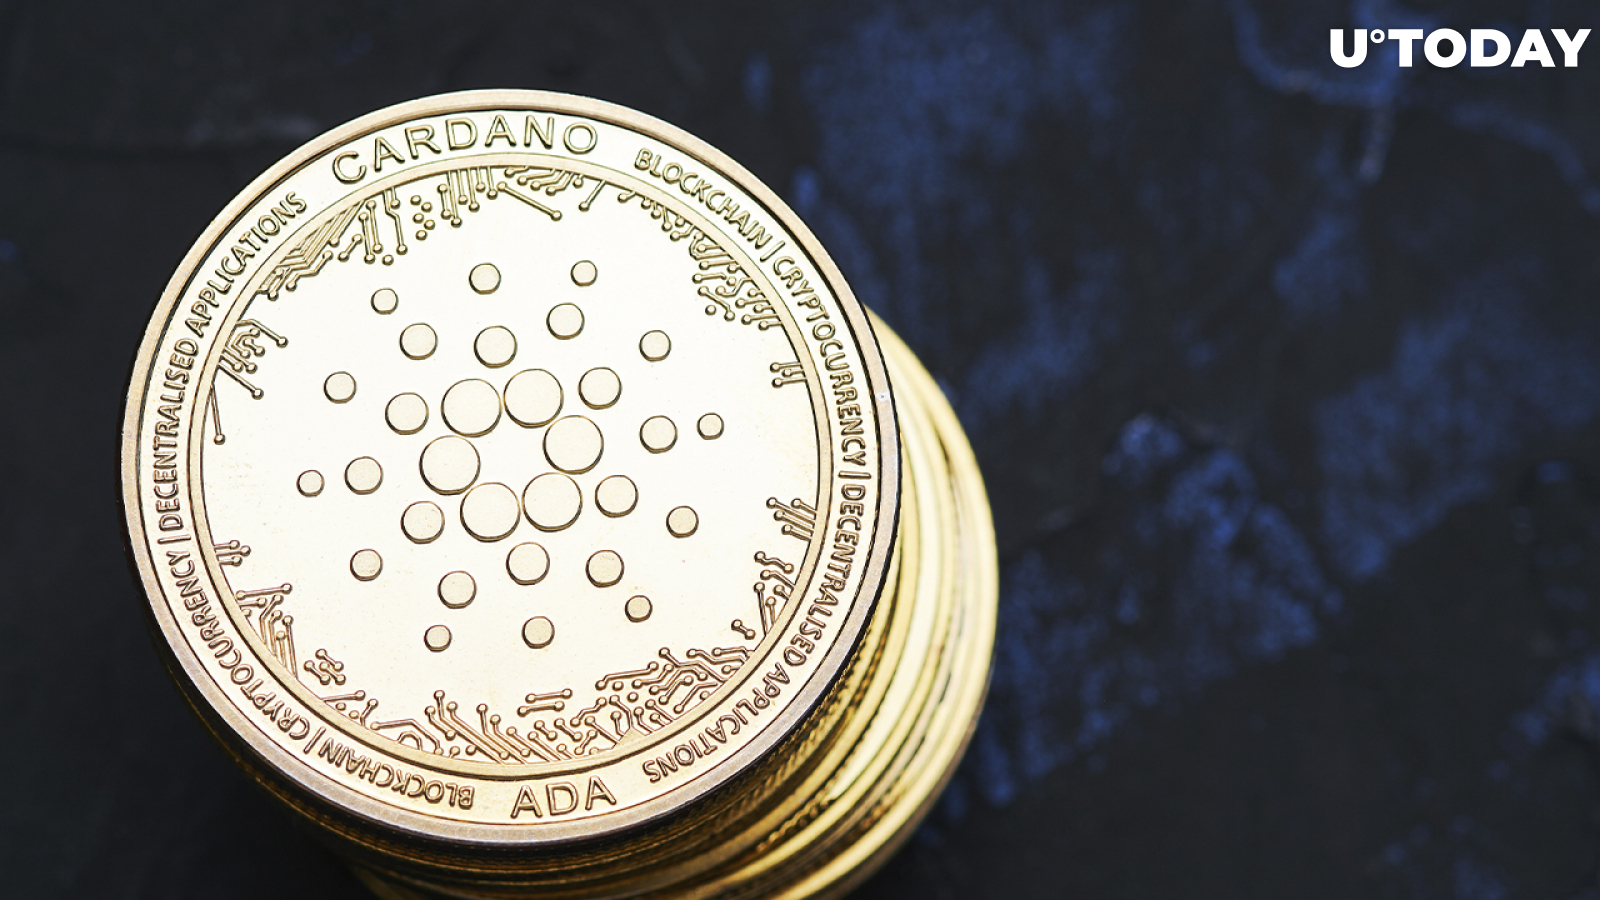 Cardano Whales Bought Over 16 Million ADA as Price Surged, Data Shows